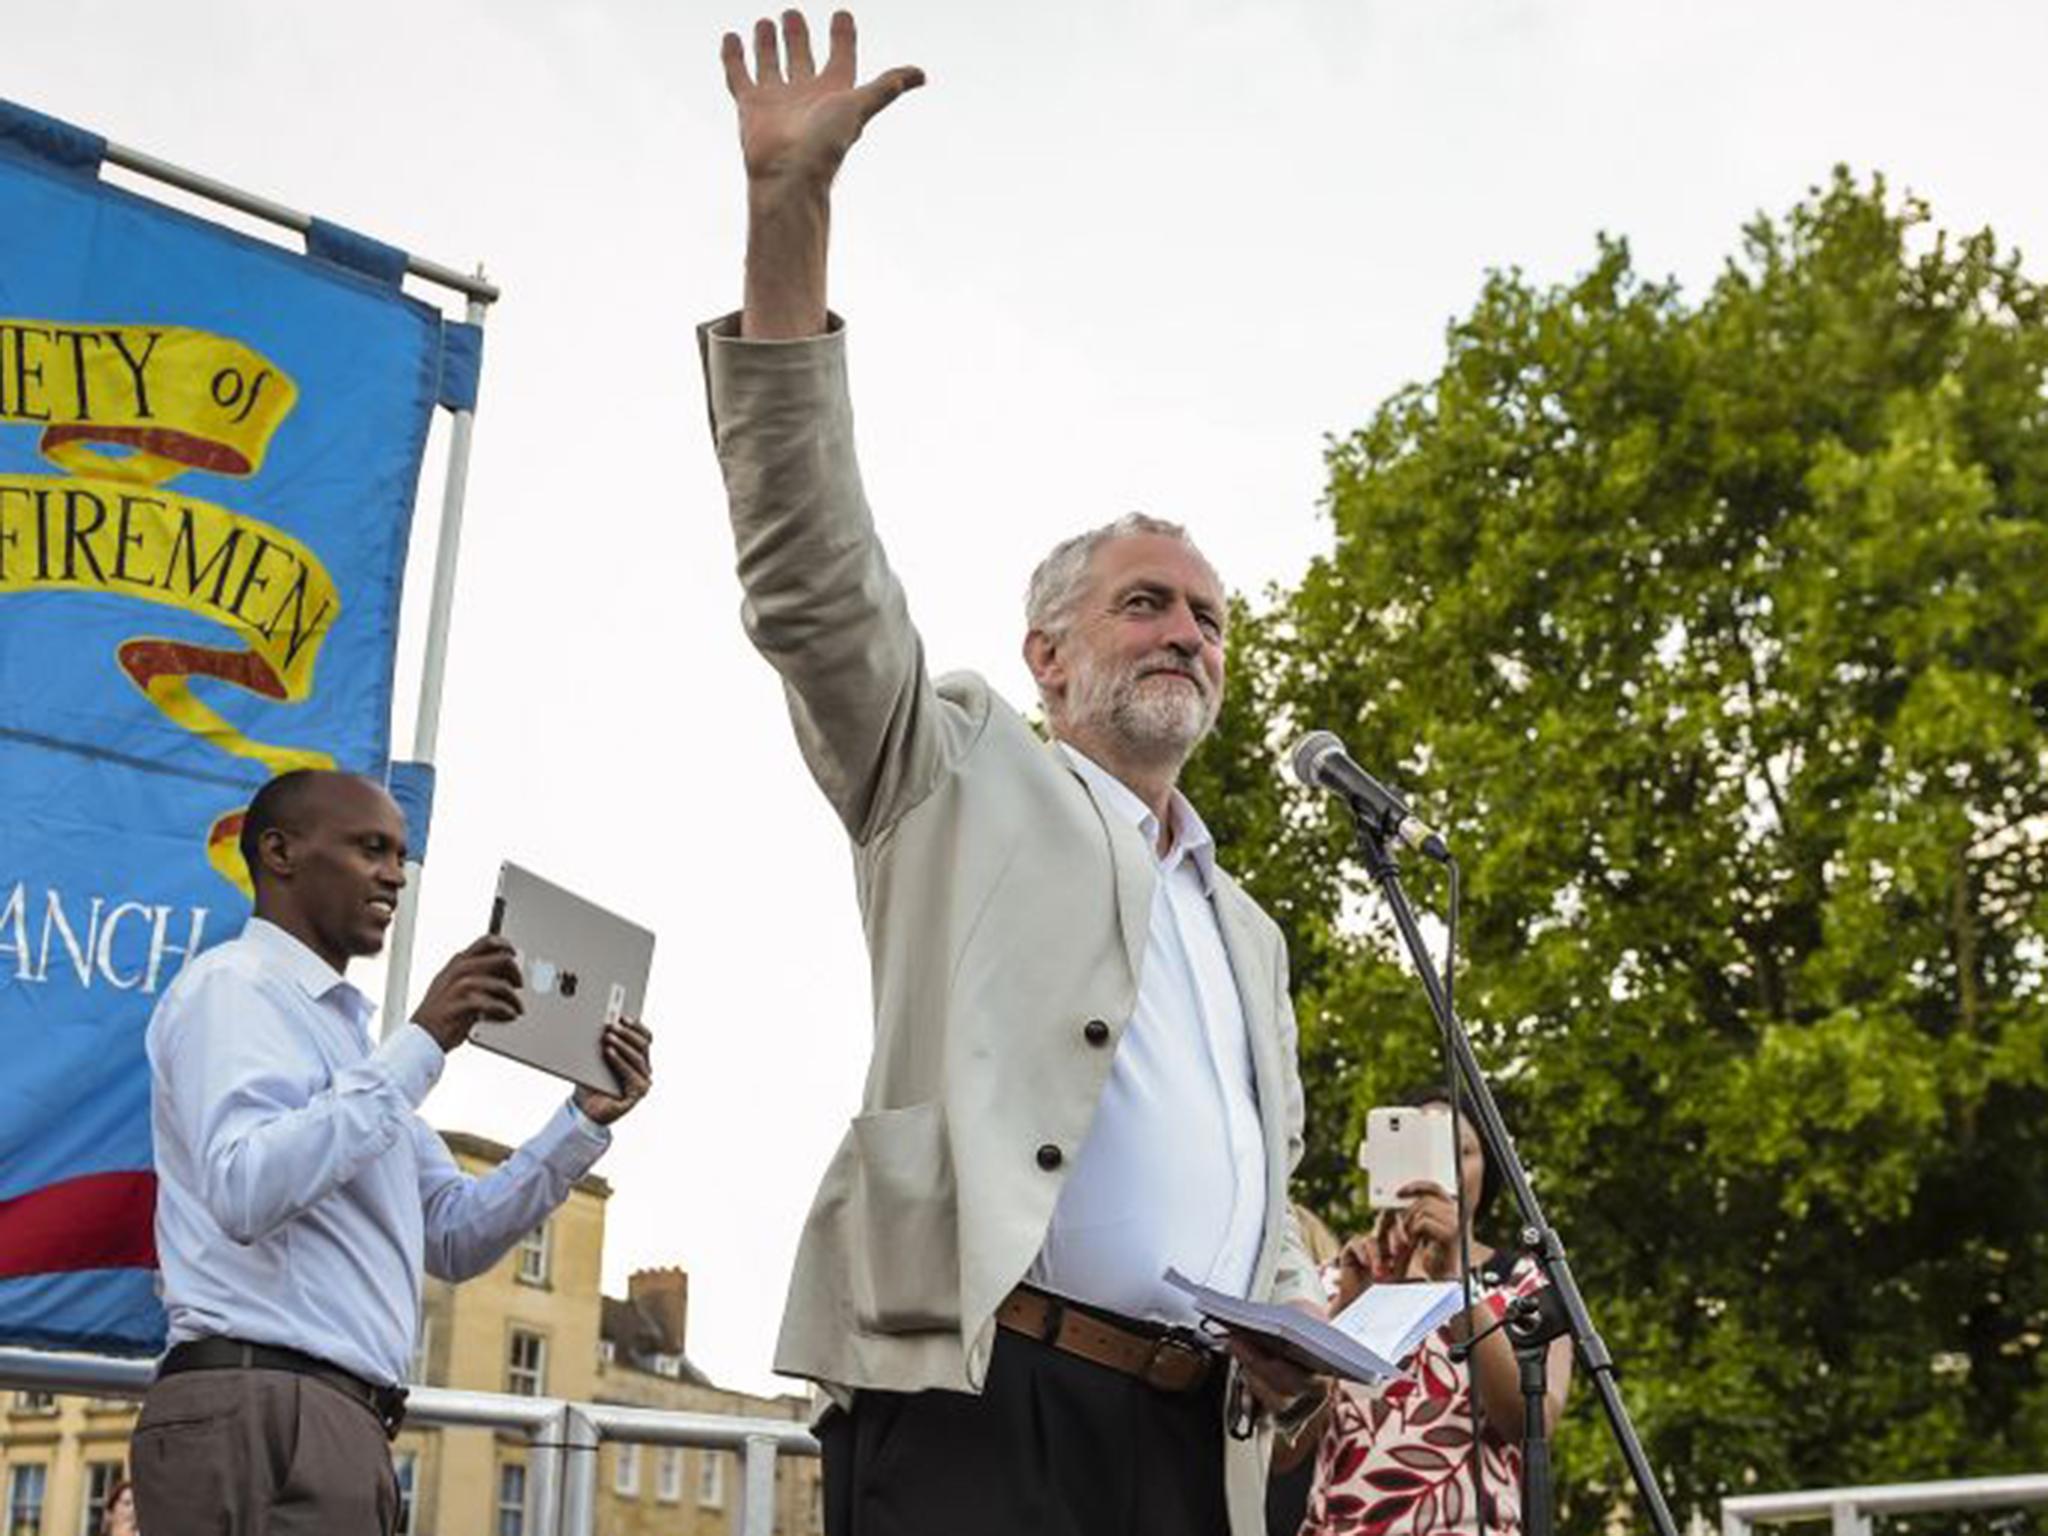 Jeremy Corbyn at a Labour leadership hustings in College Green, Bristol